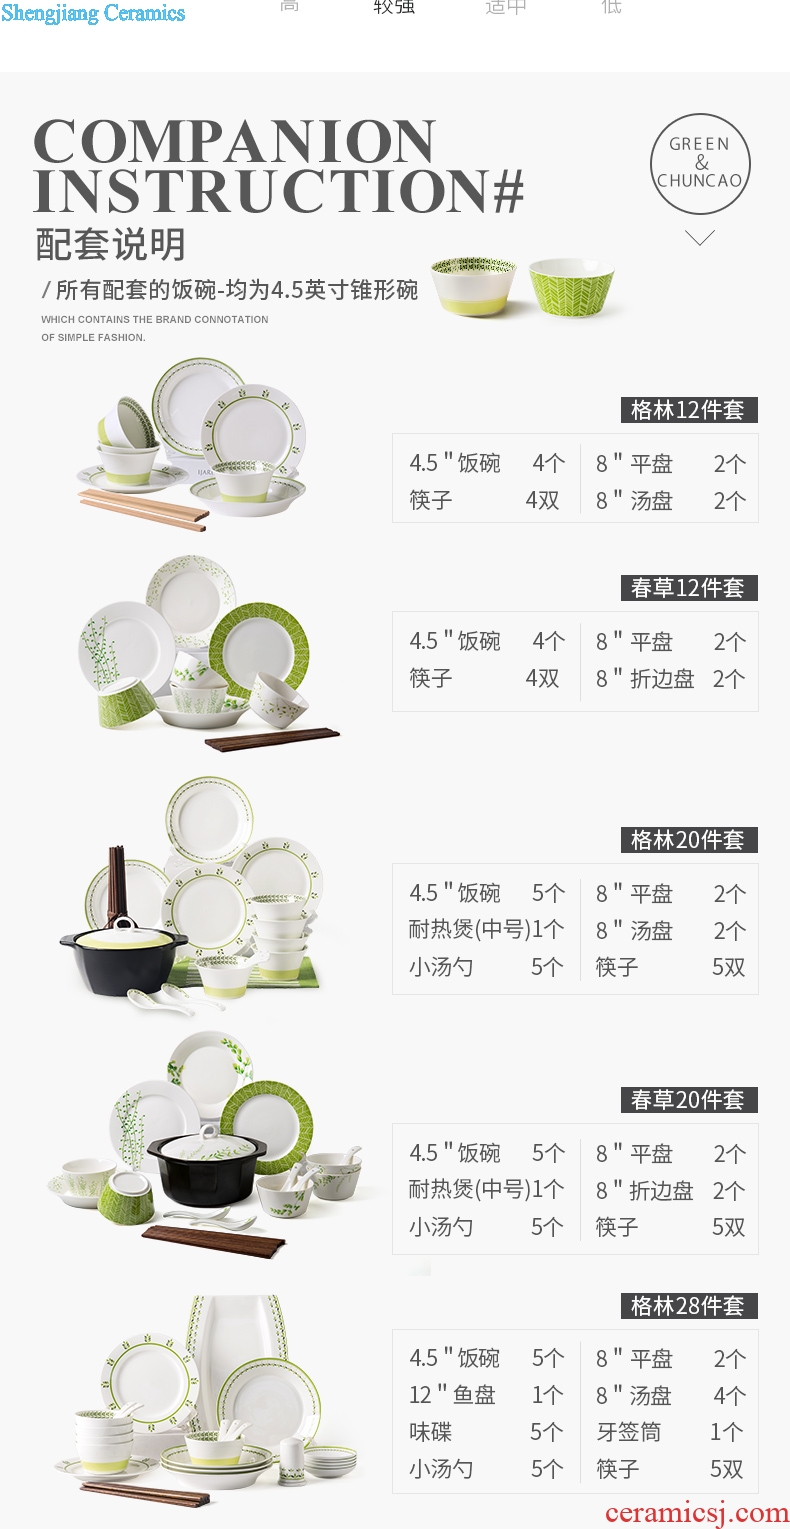 Million jia tableware suit dishes home dishes suit contracted 6 Chinese ins bowl chopsticks ceramic dish bowl suit